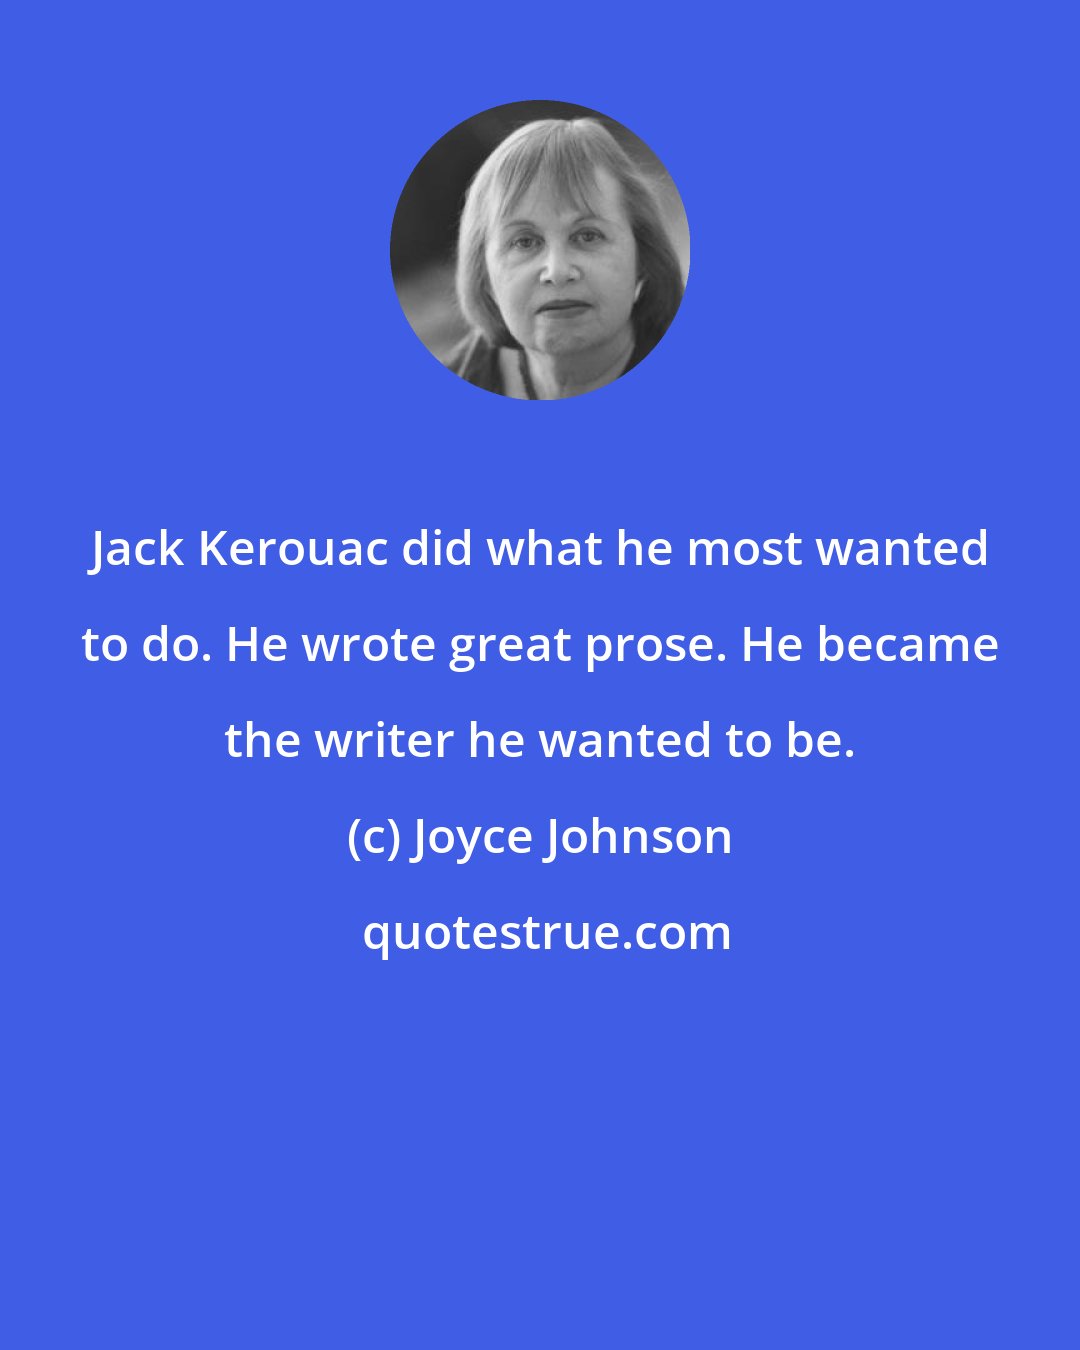 Joyce Johnson: Jack Kerouac did what he most wanted to do. He wrote great prose. He became the writer he wanted to be.